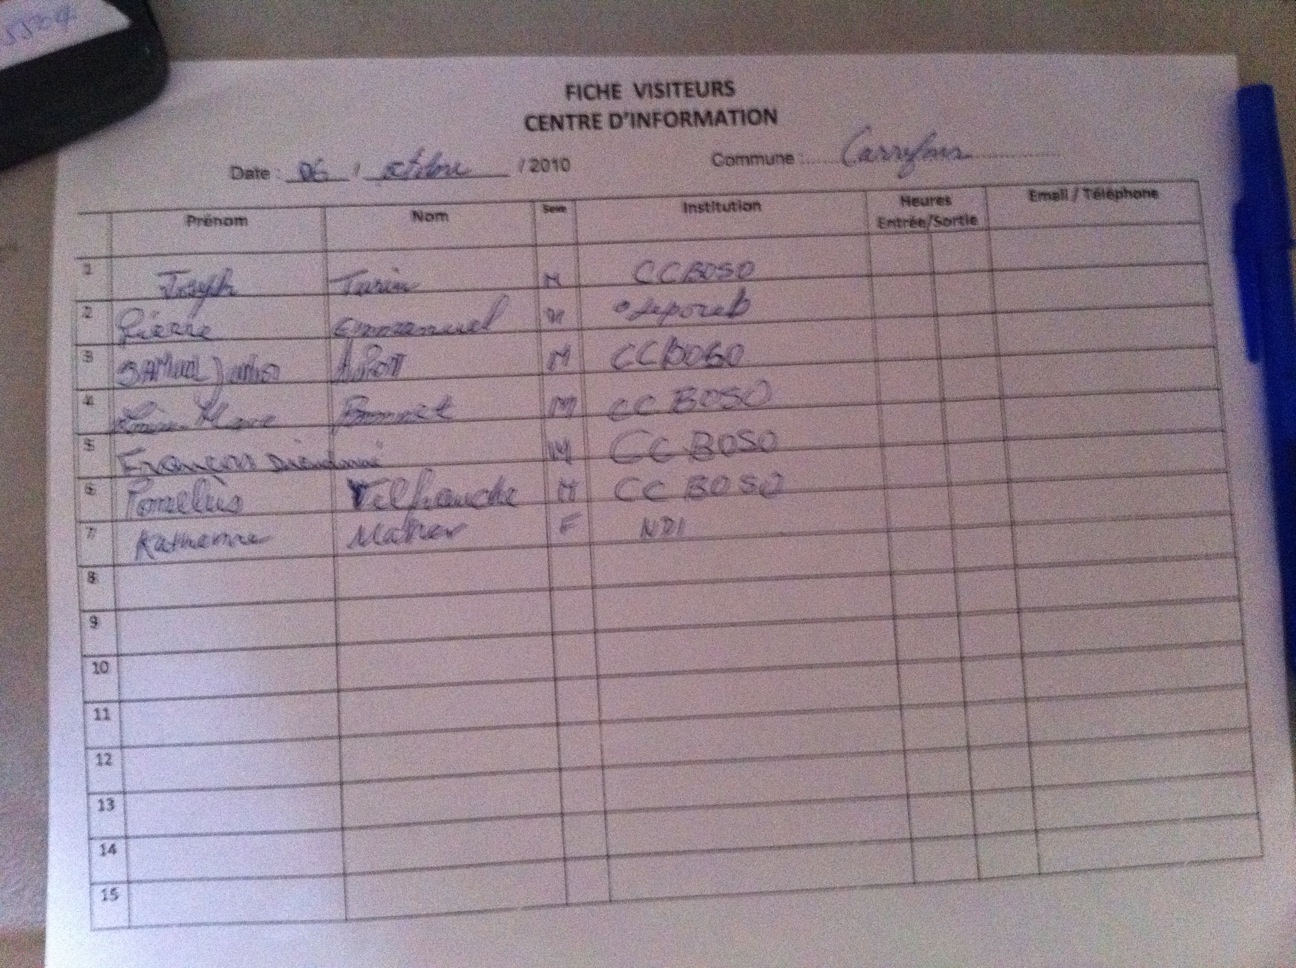 A handwritten register of 7 names and the organization represented